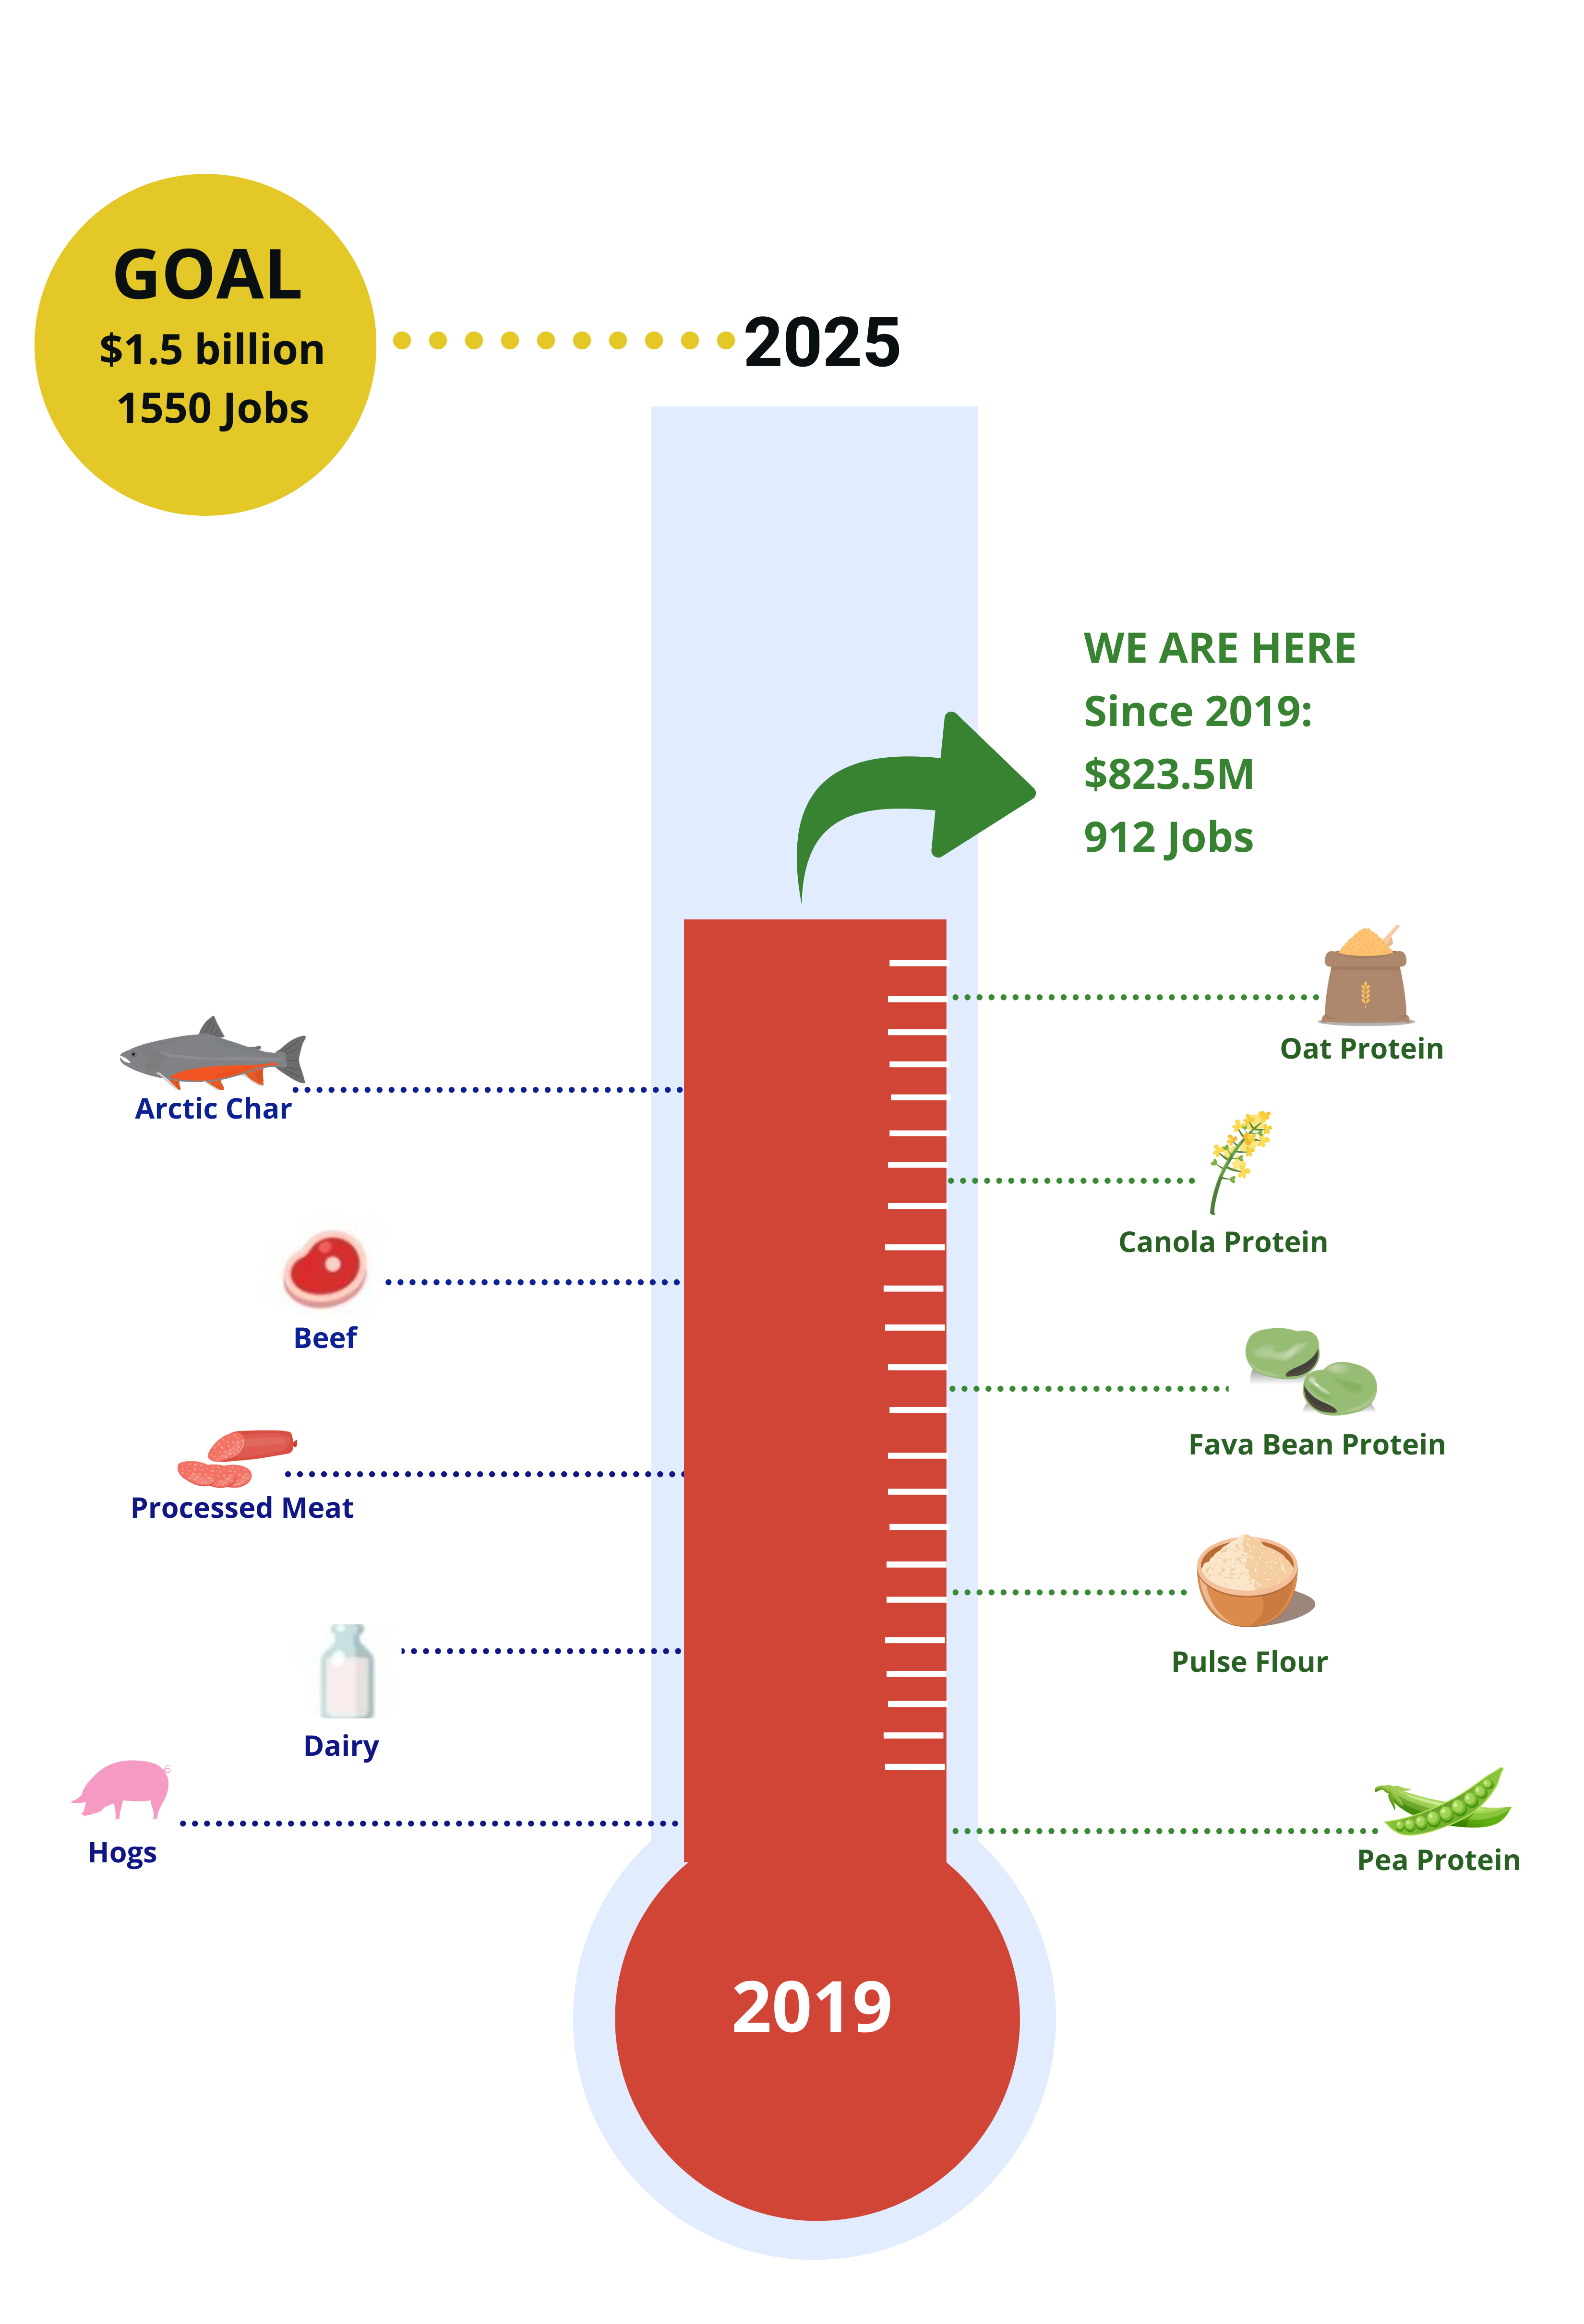 Infographic of a thermometer showing the progress of the Manitoba Protein Advantage Strategy in reaching its goal to $1.5B